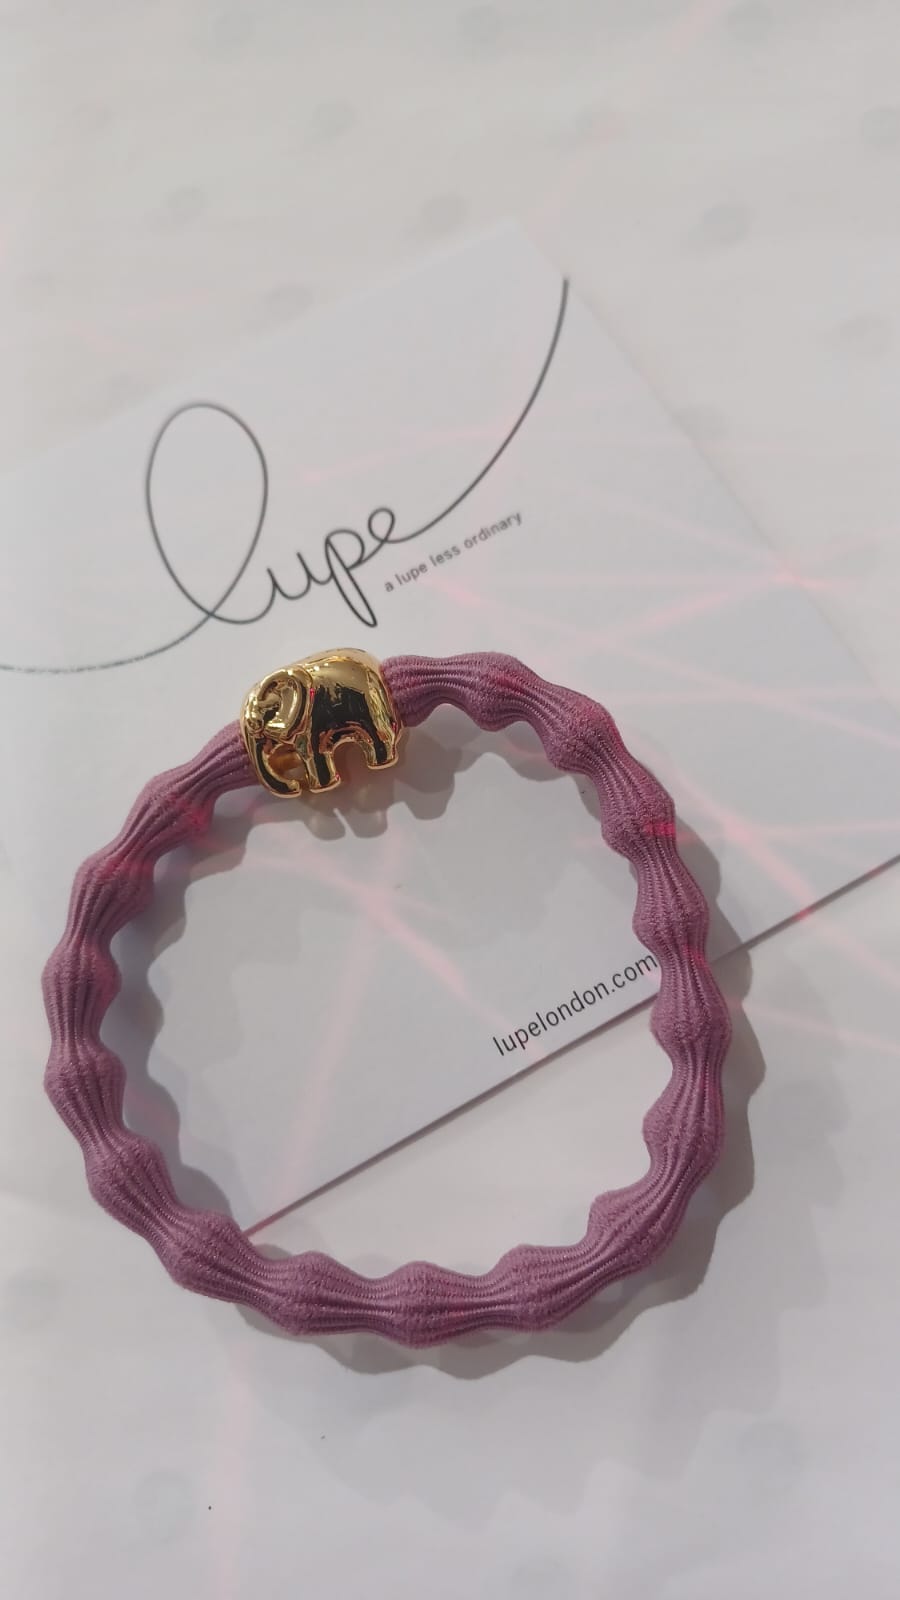 Lupe Hair Tie and Bracelet Gold Elephant